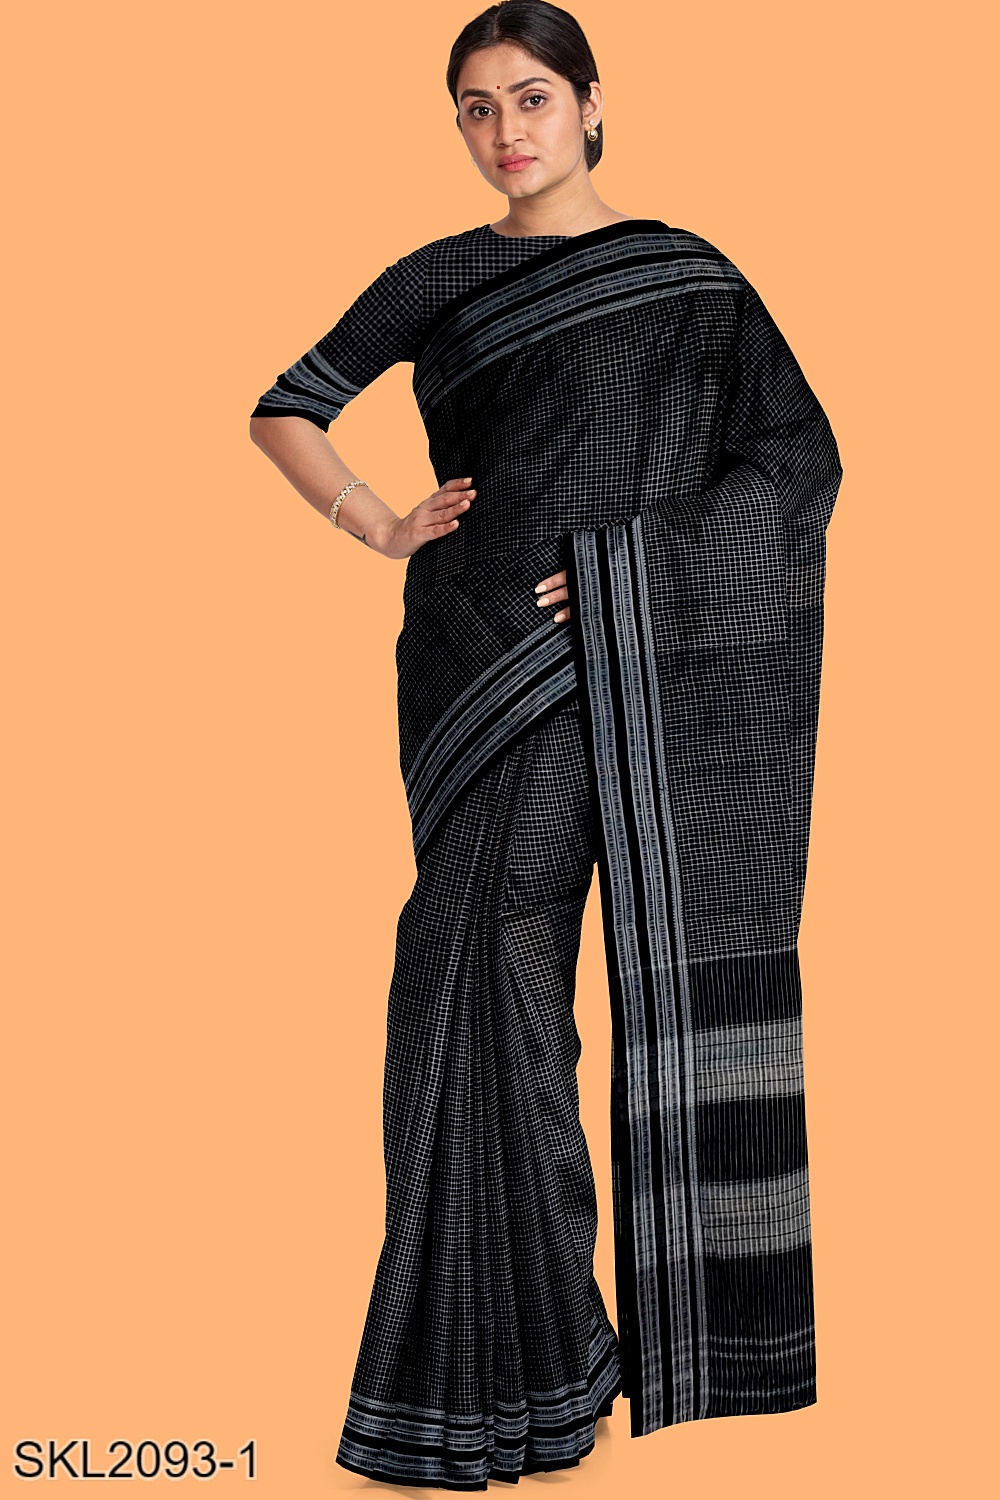 Sarees Starts Rs.174 Online at Best Price in India